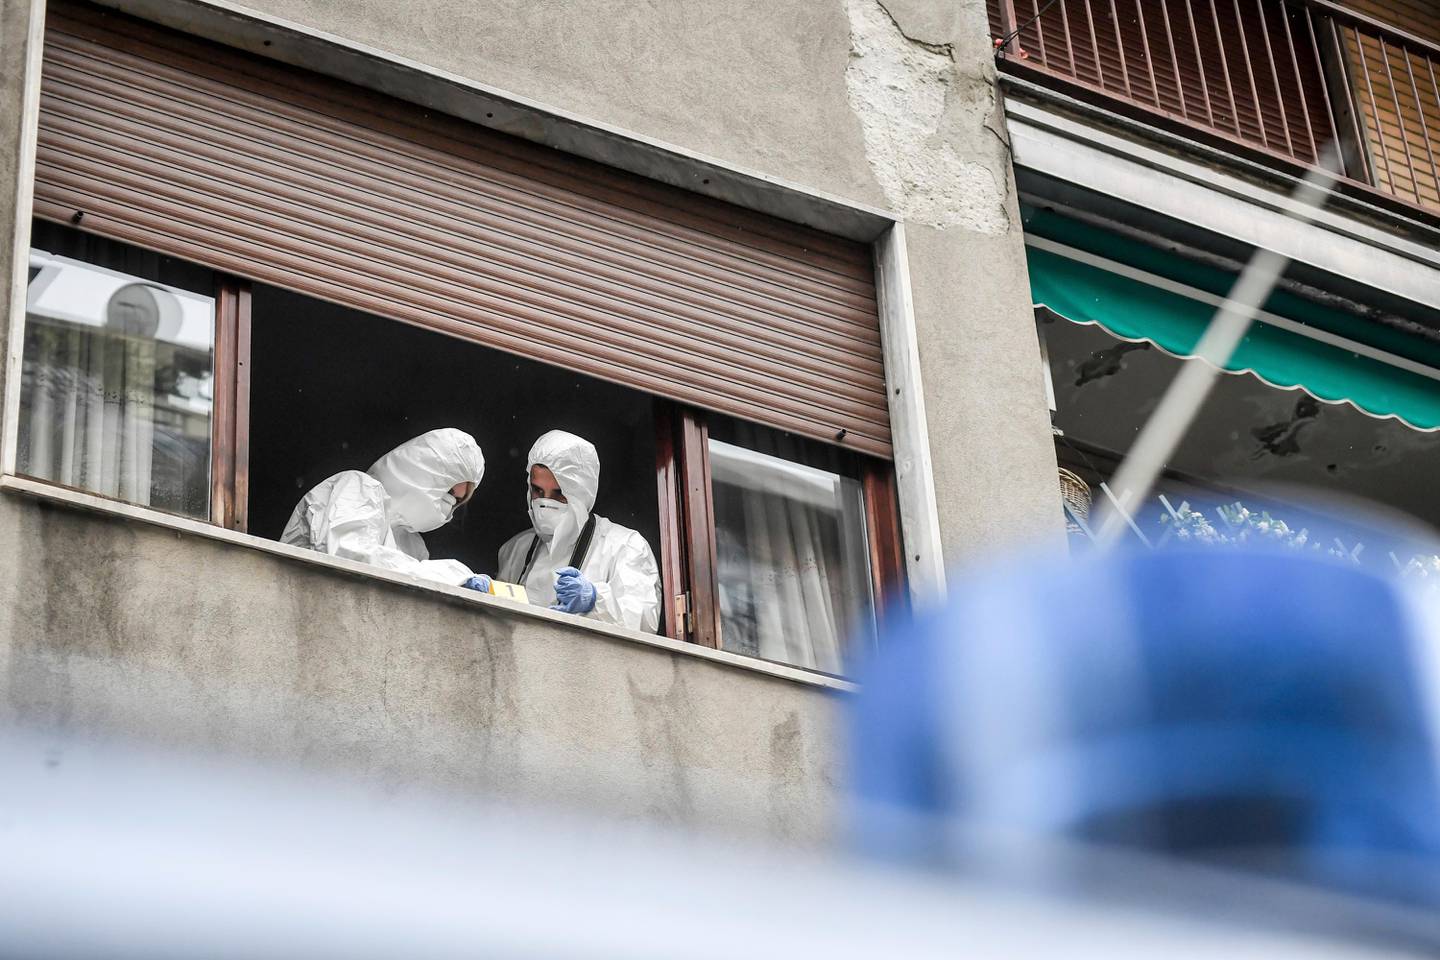 Forensic police officers at work after being called to the Silvia Romano family apartment in Milan, Wednesday, May 13, 2020 after a glass bottle was thrown against the building. A right-wing lawmaker was reprimanded Wednesday for having called a young Italian woman held hostage in Somalia by Muslim extremists a neo-terrorist after she returned home having apparently converted to Islam. Silvia Romano, 24, stepped off an Italian government jet on Sunday wearing the green hijab typical of Somali Muslim women. (Claudio Furlan/LaPresse via AP)